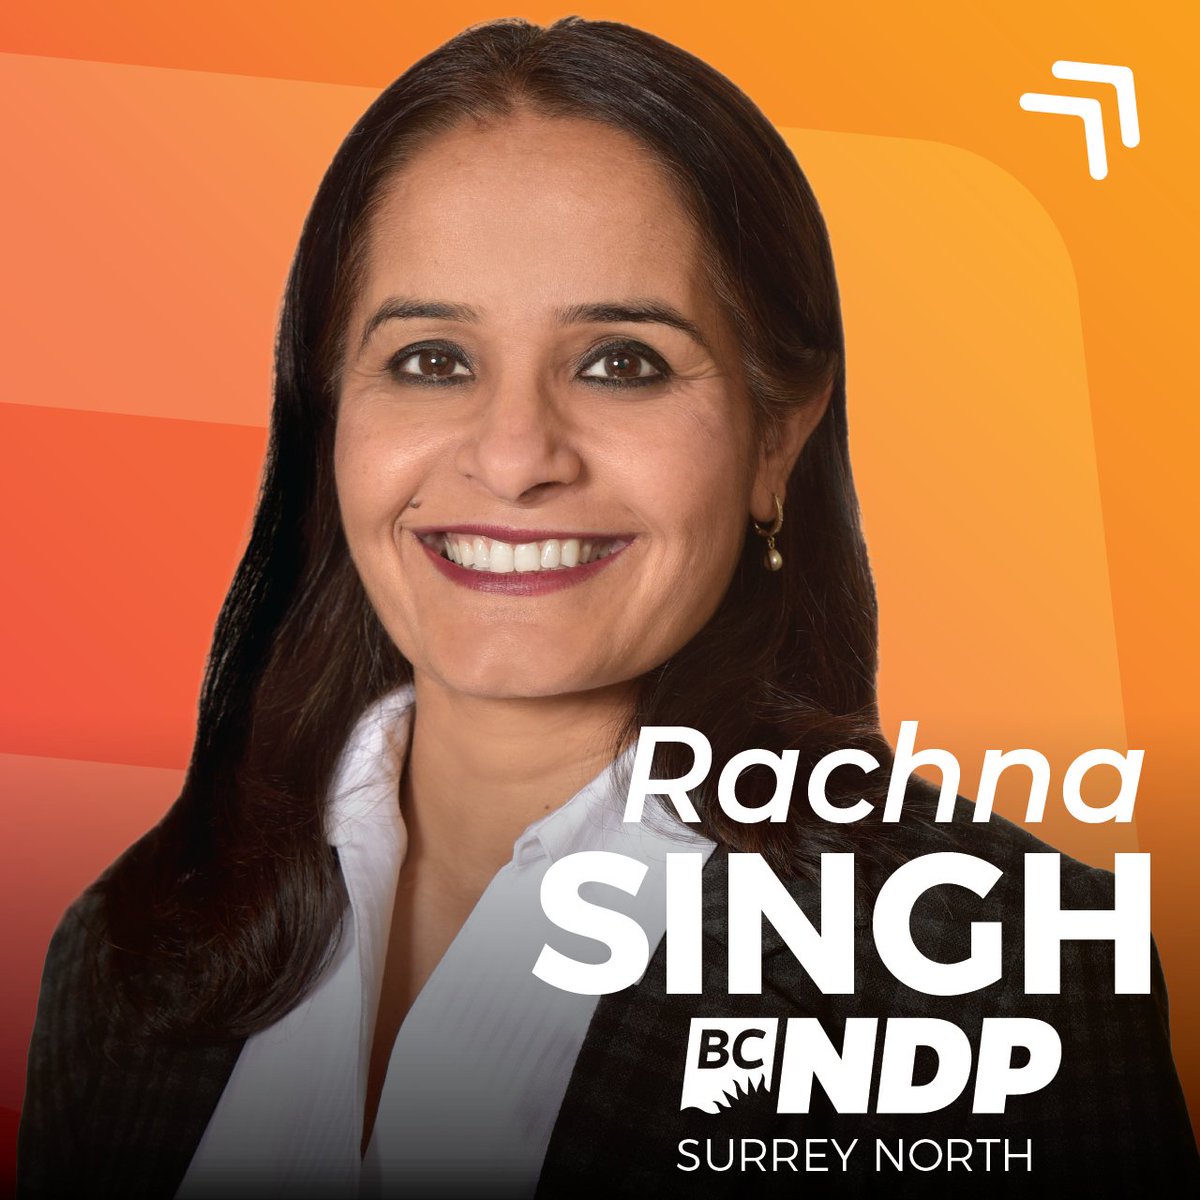 We're thrilled to announce that Rachna Singh will be our BC NDP candidate in Surrey North. A two-time MLA, Rachna moved to Canada in 2001 and chose Surrey to build a better life for her young family. She is currently the Minister of Education and Child Care. Welcome Rachna!